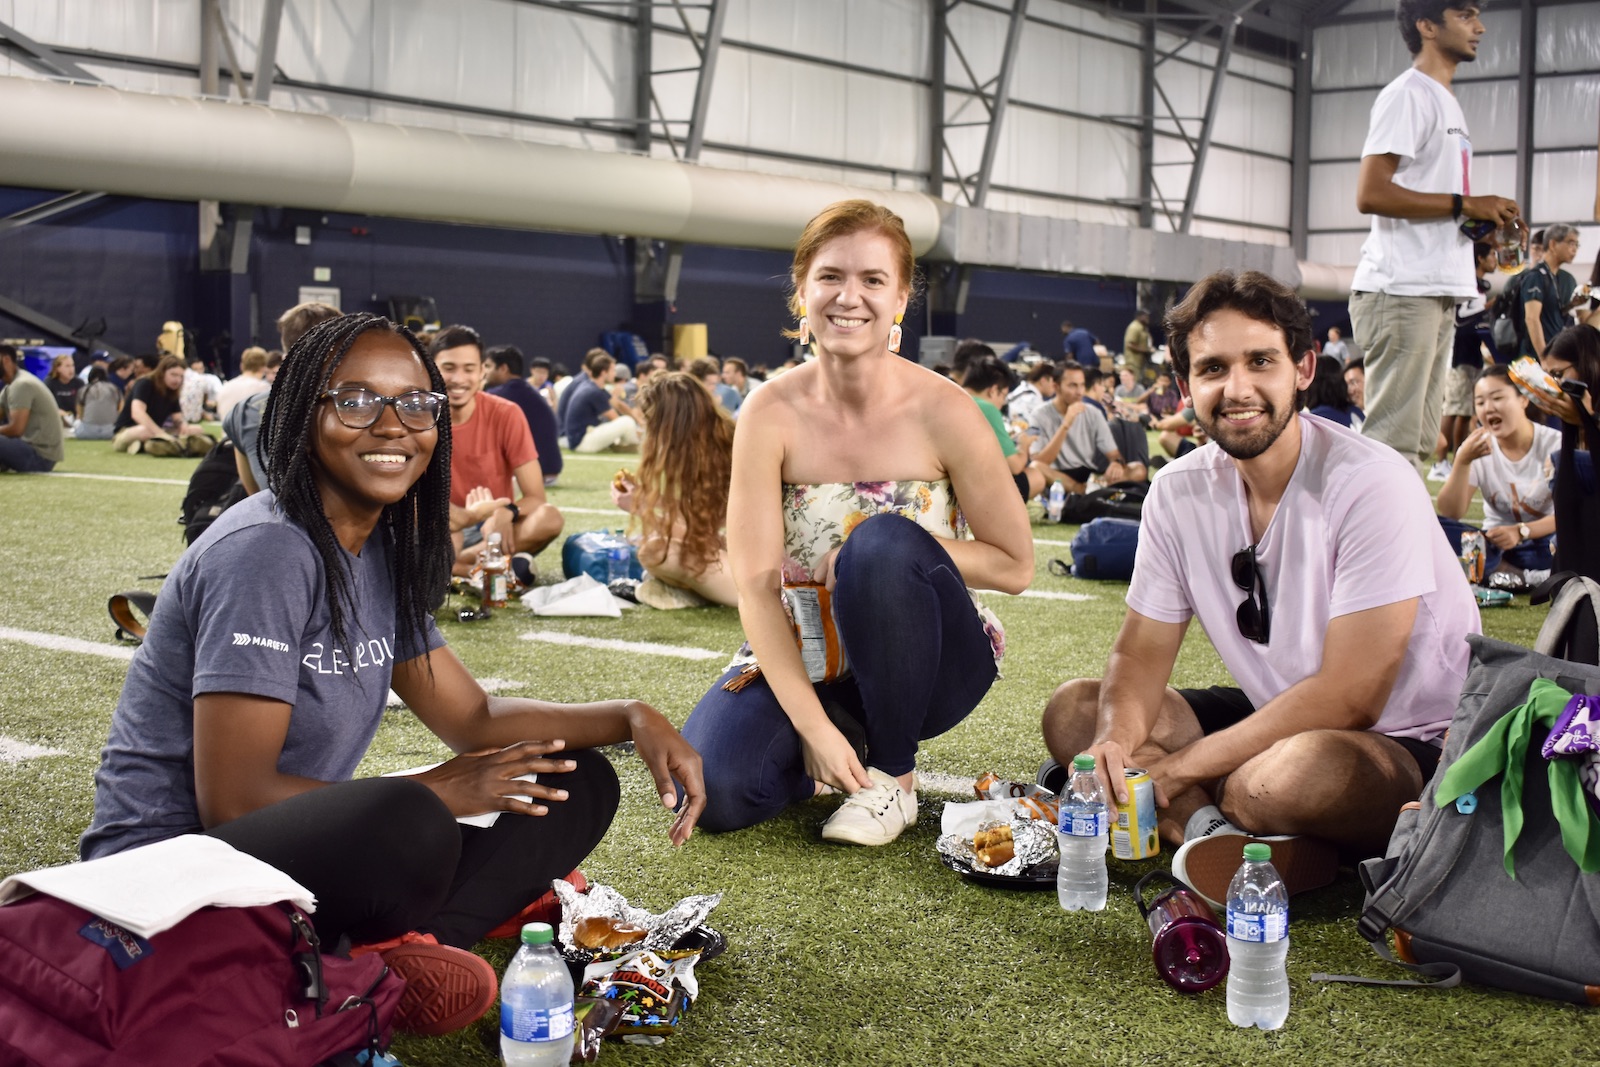 Students enjoying the Gaduate Student Welcome picnic at teh Mary and John Brock football practice facility.